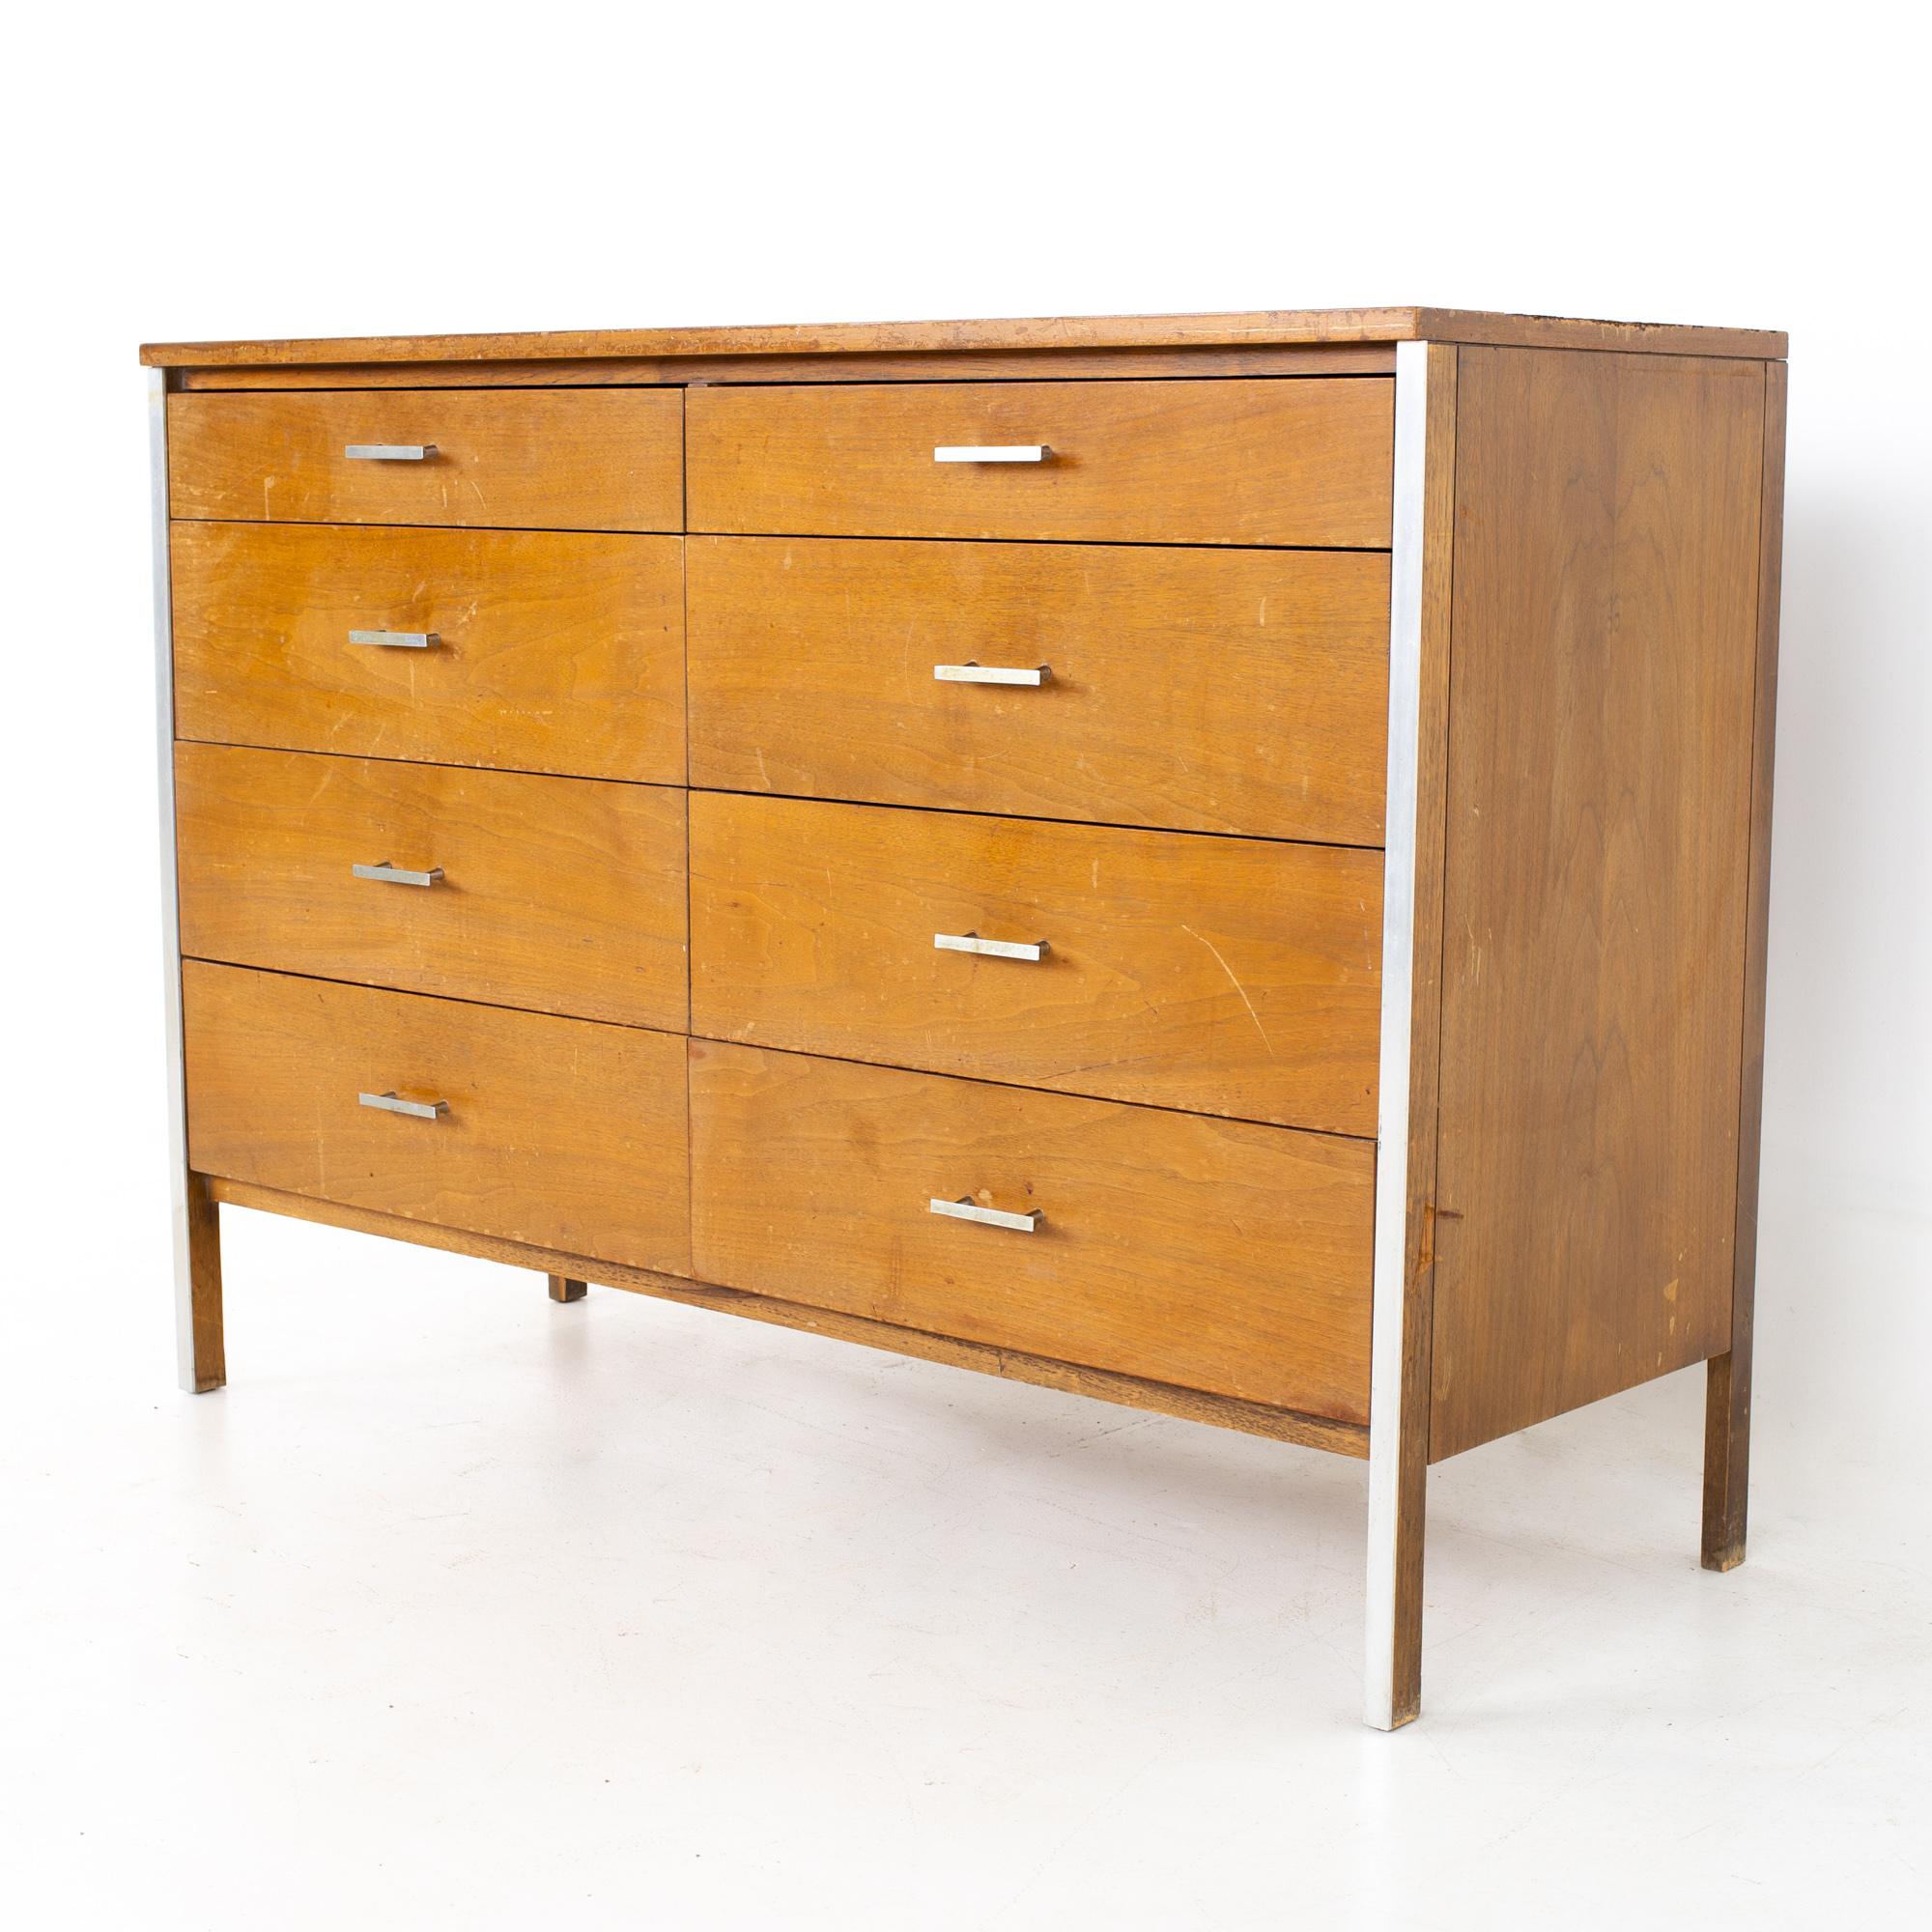 Paul McCobb linear mid century 8 drawer dresser
Dresser measures: 48 wide x 18 deep x 34 inches high

All pieces of furniture can be had in what we call restored vintage condition. That means the piece is restored upon purchase so it’s free of